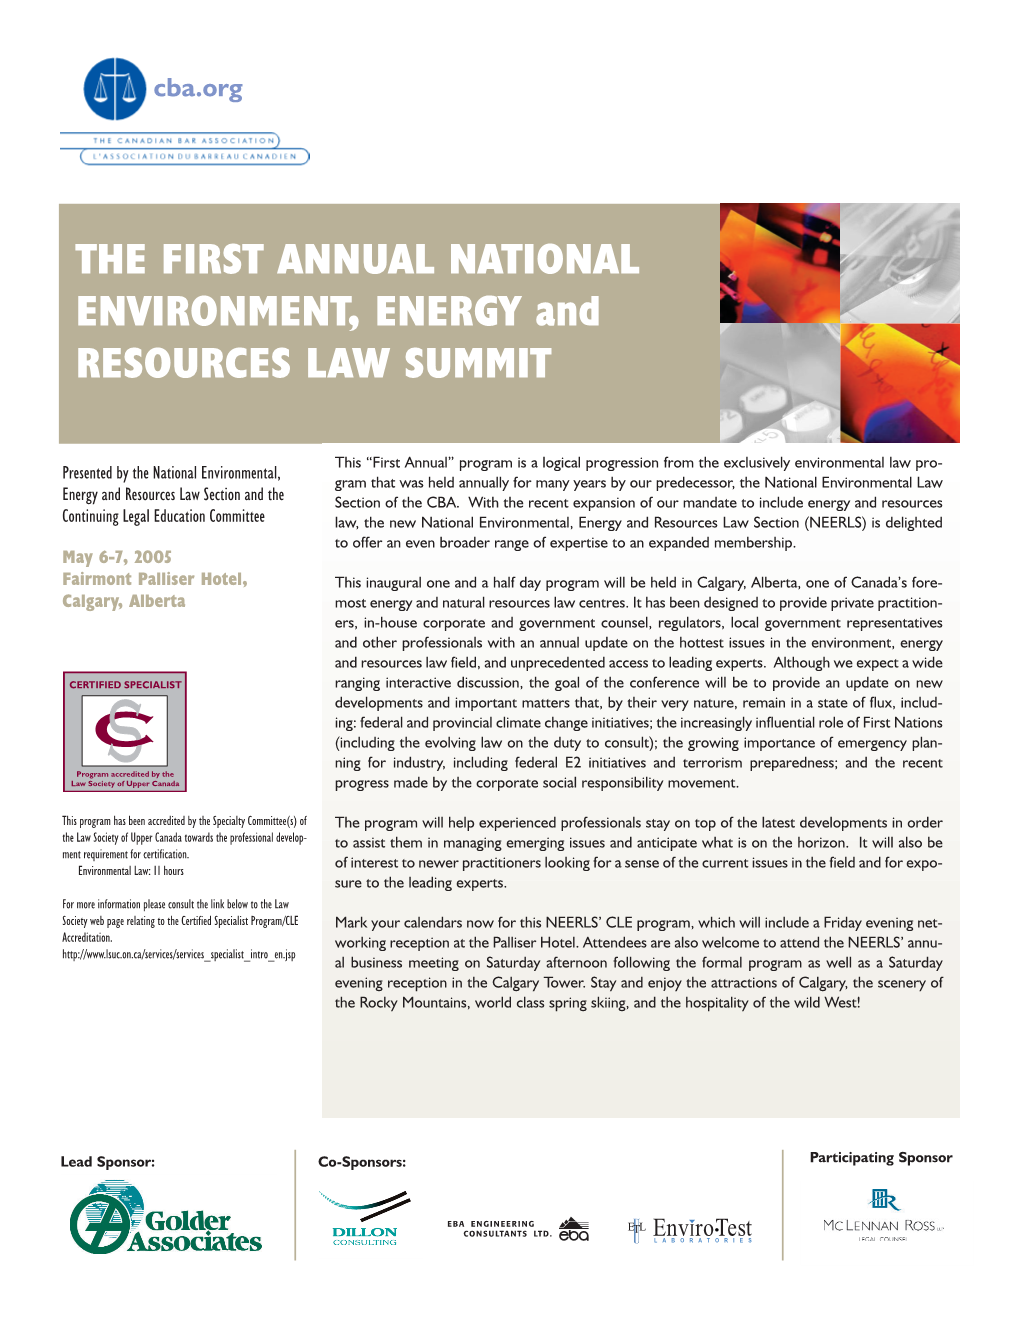 THE FIRST ANNUAL NATIONAL ENVIRONMENT, ENERGY and RESOURCES LAW SUMMIT